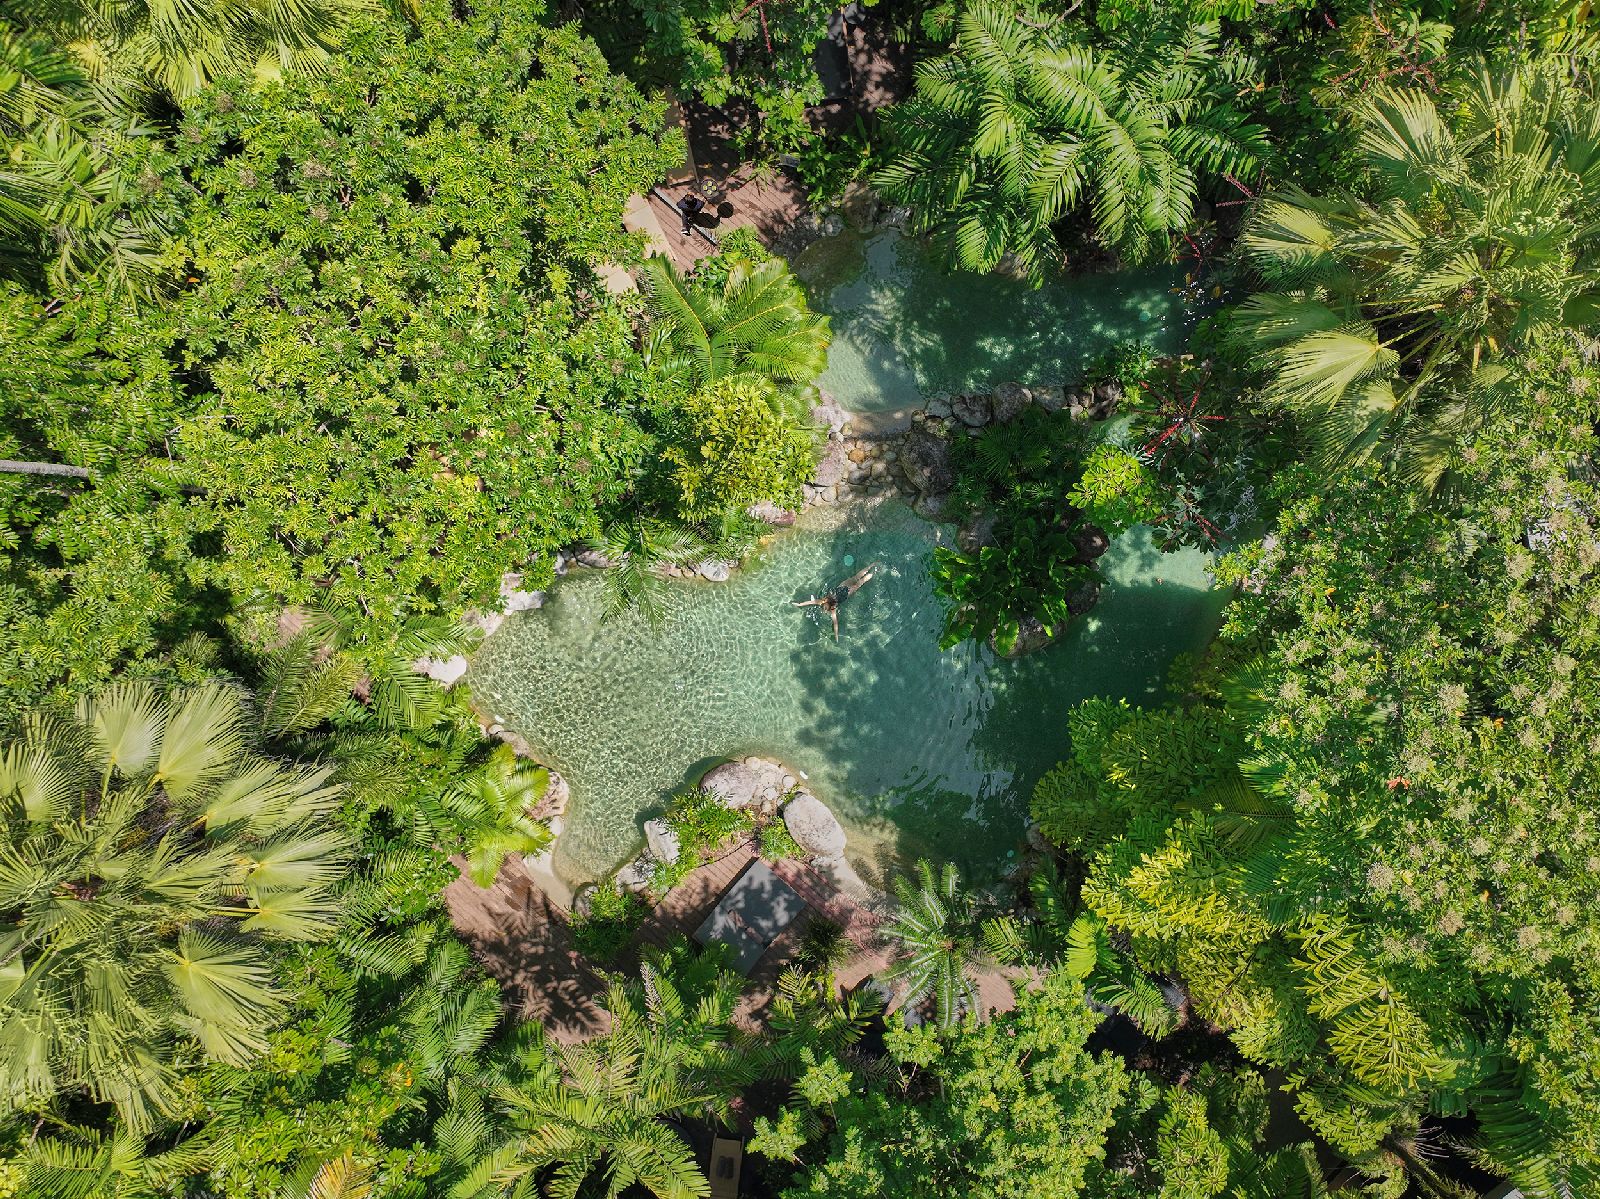 Aerial view of the lagoon style swimming pool at Silky Oaks Daintree Australia